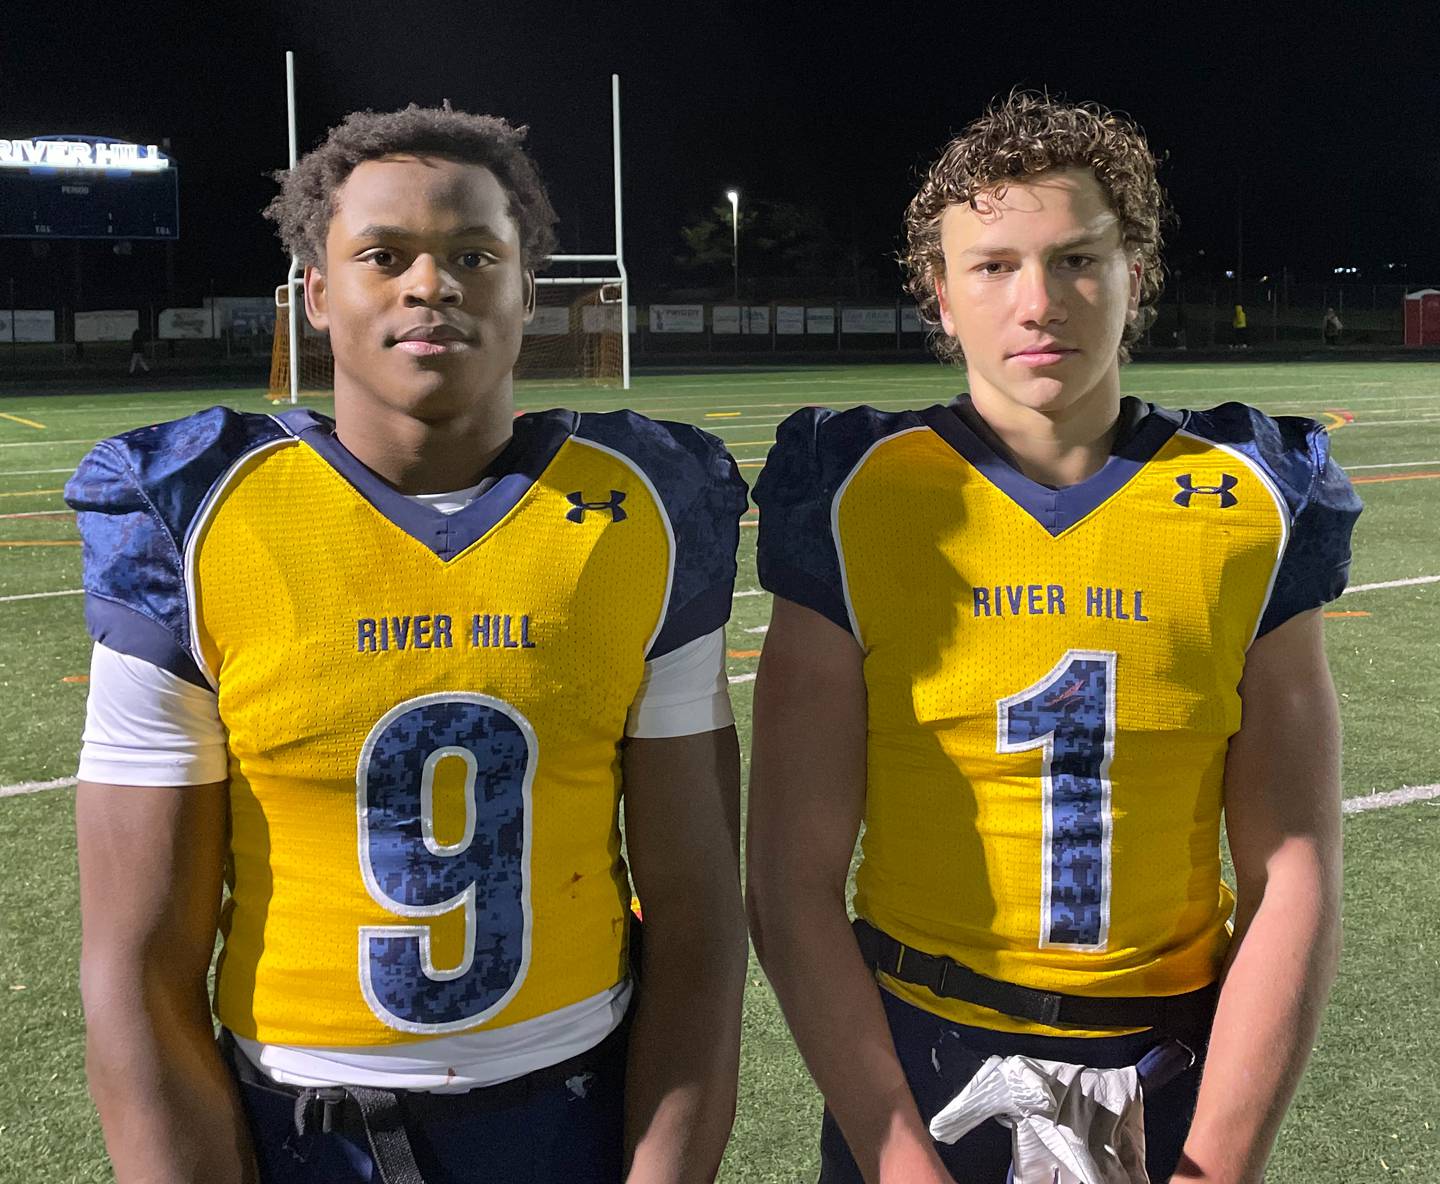 Eje Okojie (left) and Ethan Burnett was part of an efficient running attack for River Hill football Friday night. Behind Okojie's second quarter scoring run, the Hawks defeated No. 15 Franklin in a Class 3A state quarterfinal in Clarksville.